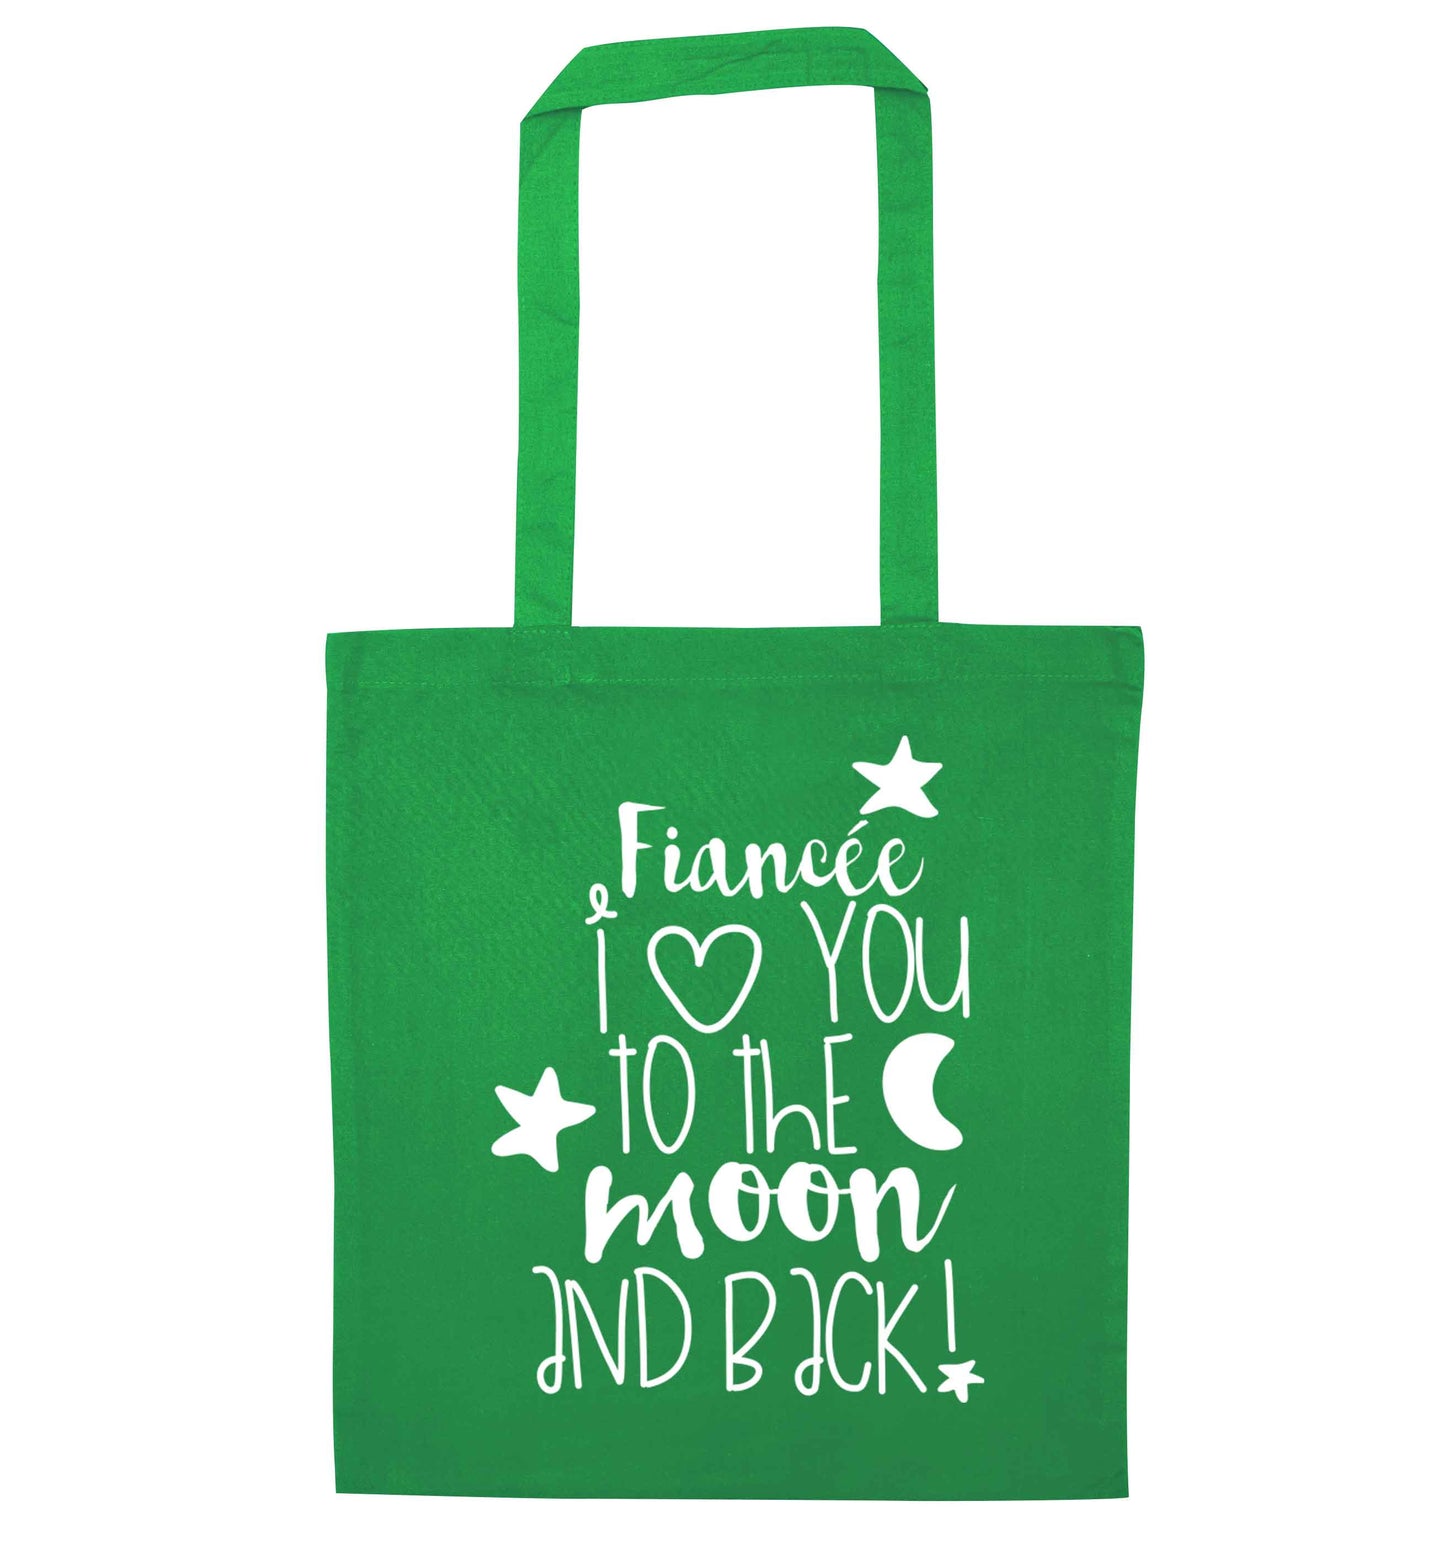 Fiancée I love you to the moon and back green tote bag